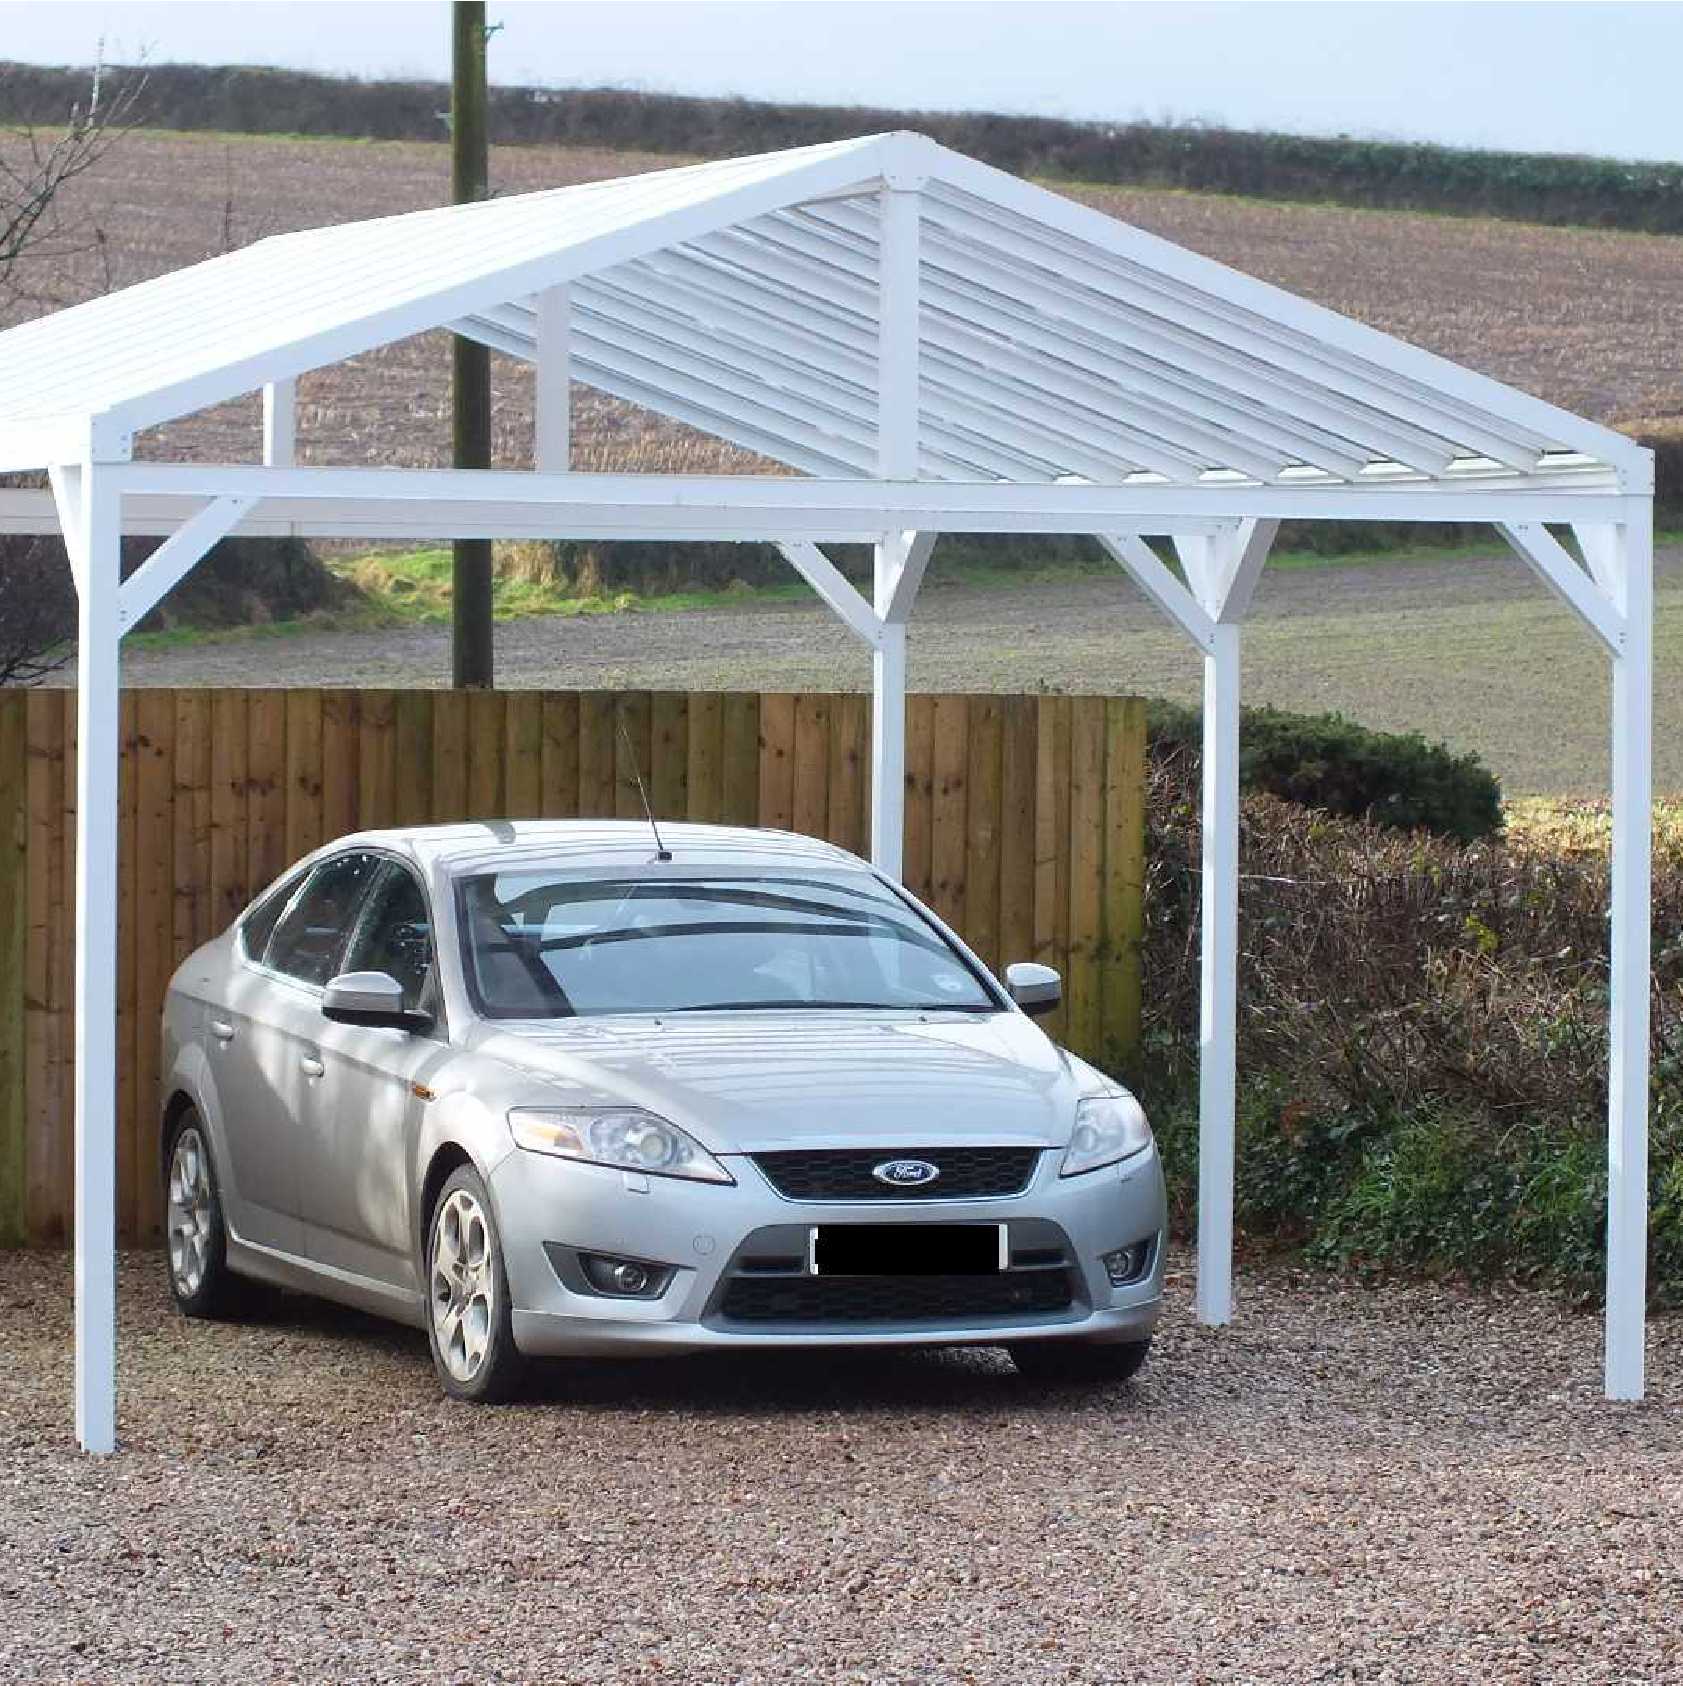 Buy Omega Smart Free-Standing, White Gable-Roof (type 1) Canopy with 16mm Polycarbonate Glazing - 5.2m (W) x 4.0m (P), (6) Supporting Posts online today